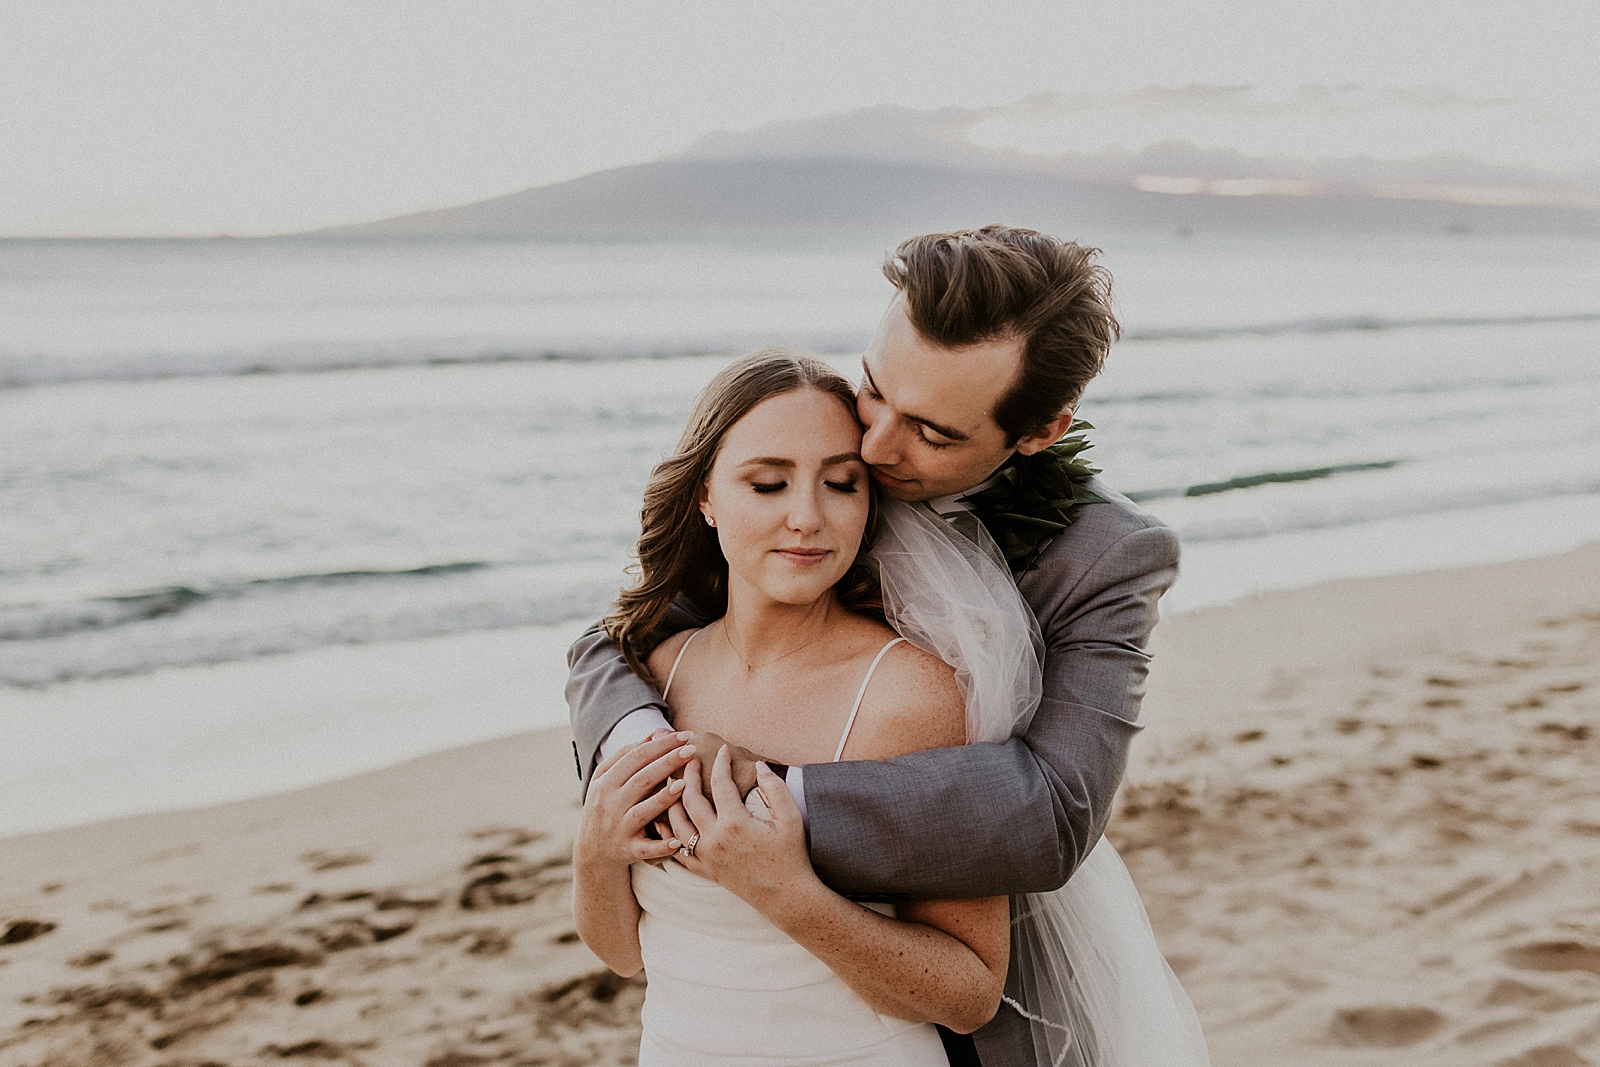 Groom holding Bride from behind on the beach by the ocean